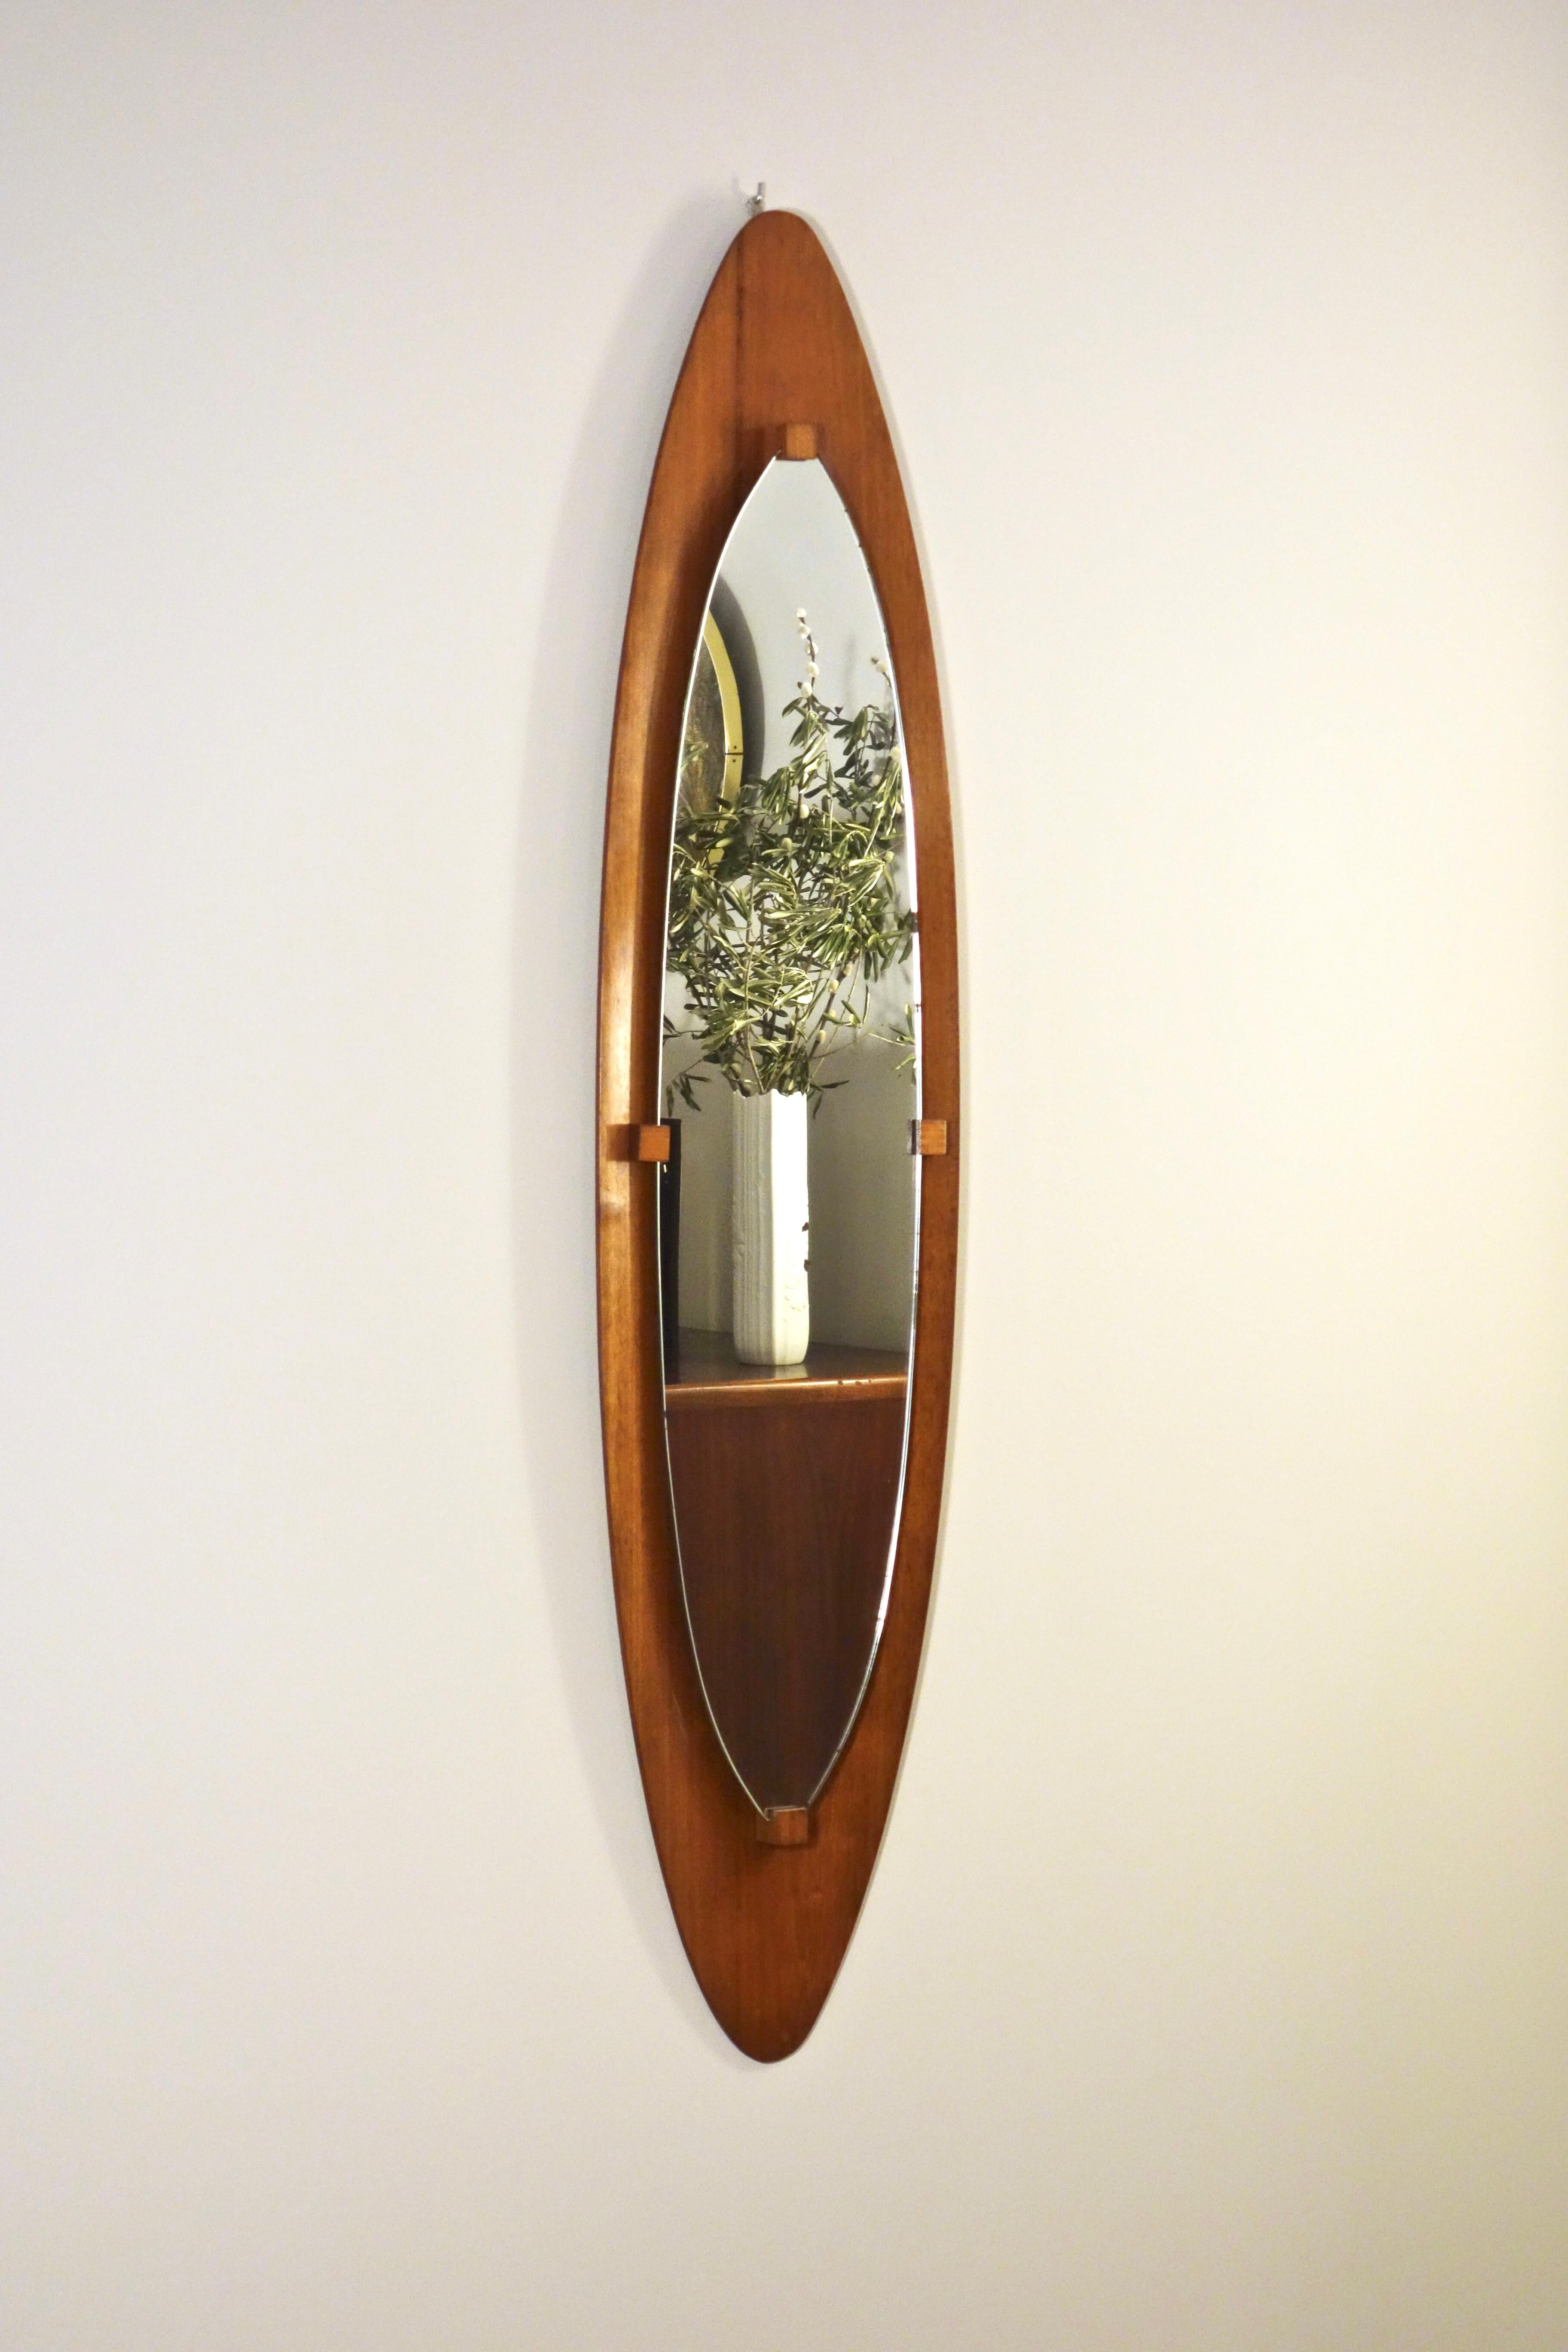 Large Italian mirror by designers Franco Campo & Carlo Graffi for Home dating from the 1950's

Oval-shaped wall mirror with curved plywood teak surround receiving a mirror held by 4 solid teak pieces

Item restored with special oil for teak. It has